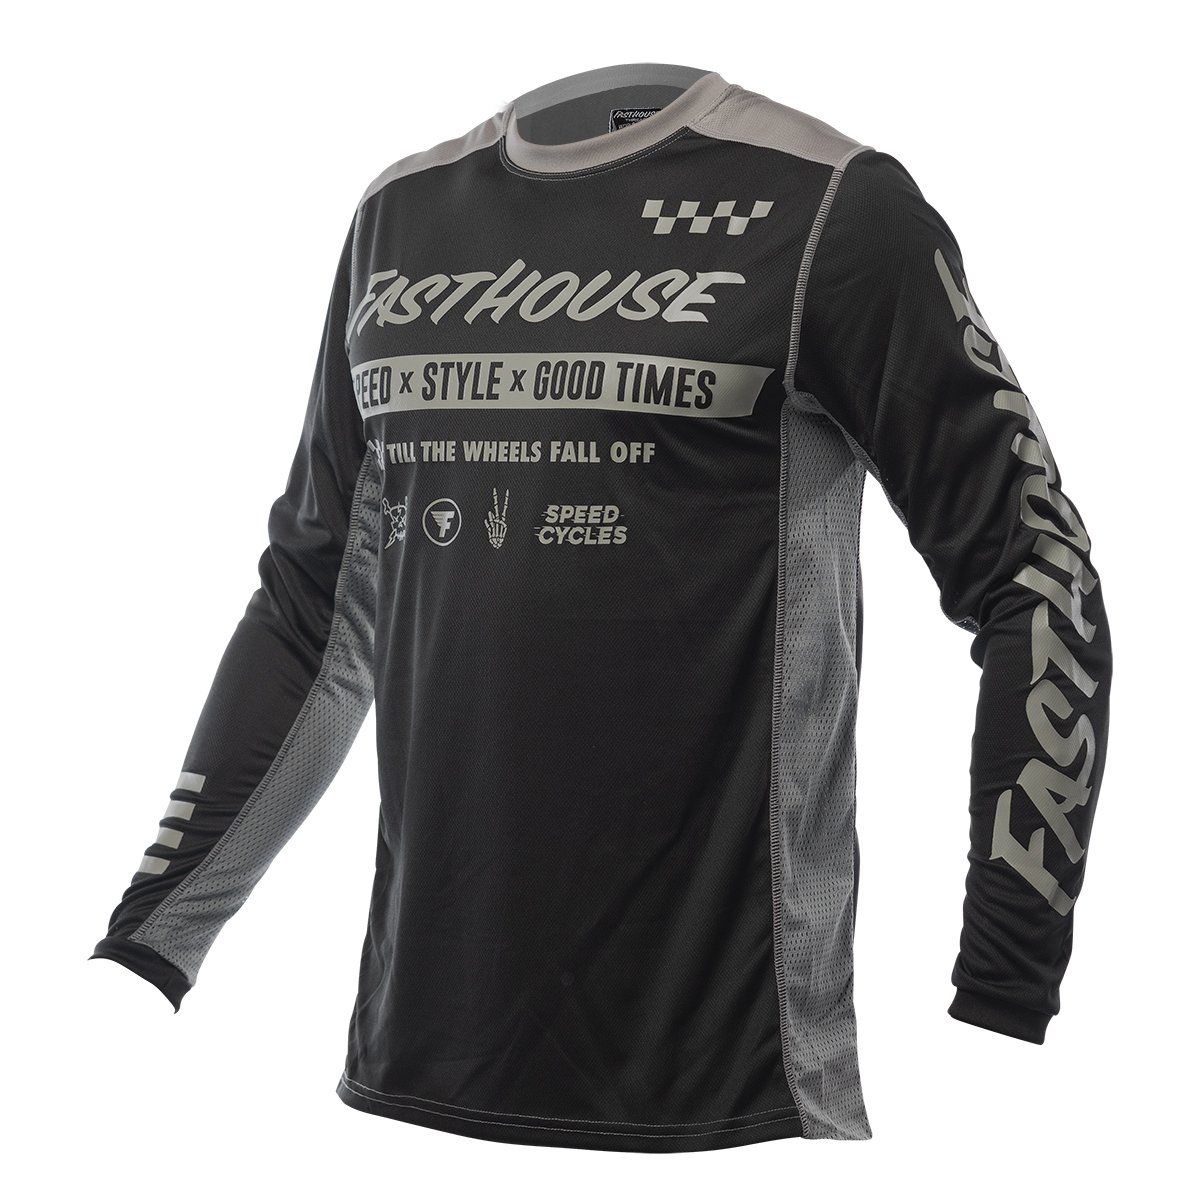 Fasthouse Grindhouse Domingo Jersey, Adult - Blk - Motoxtremes